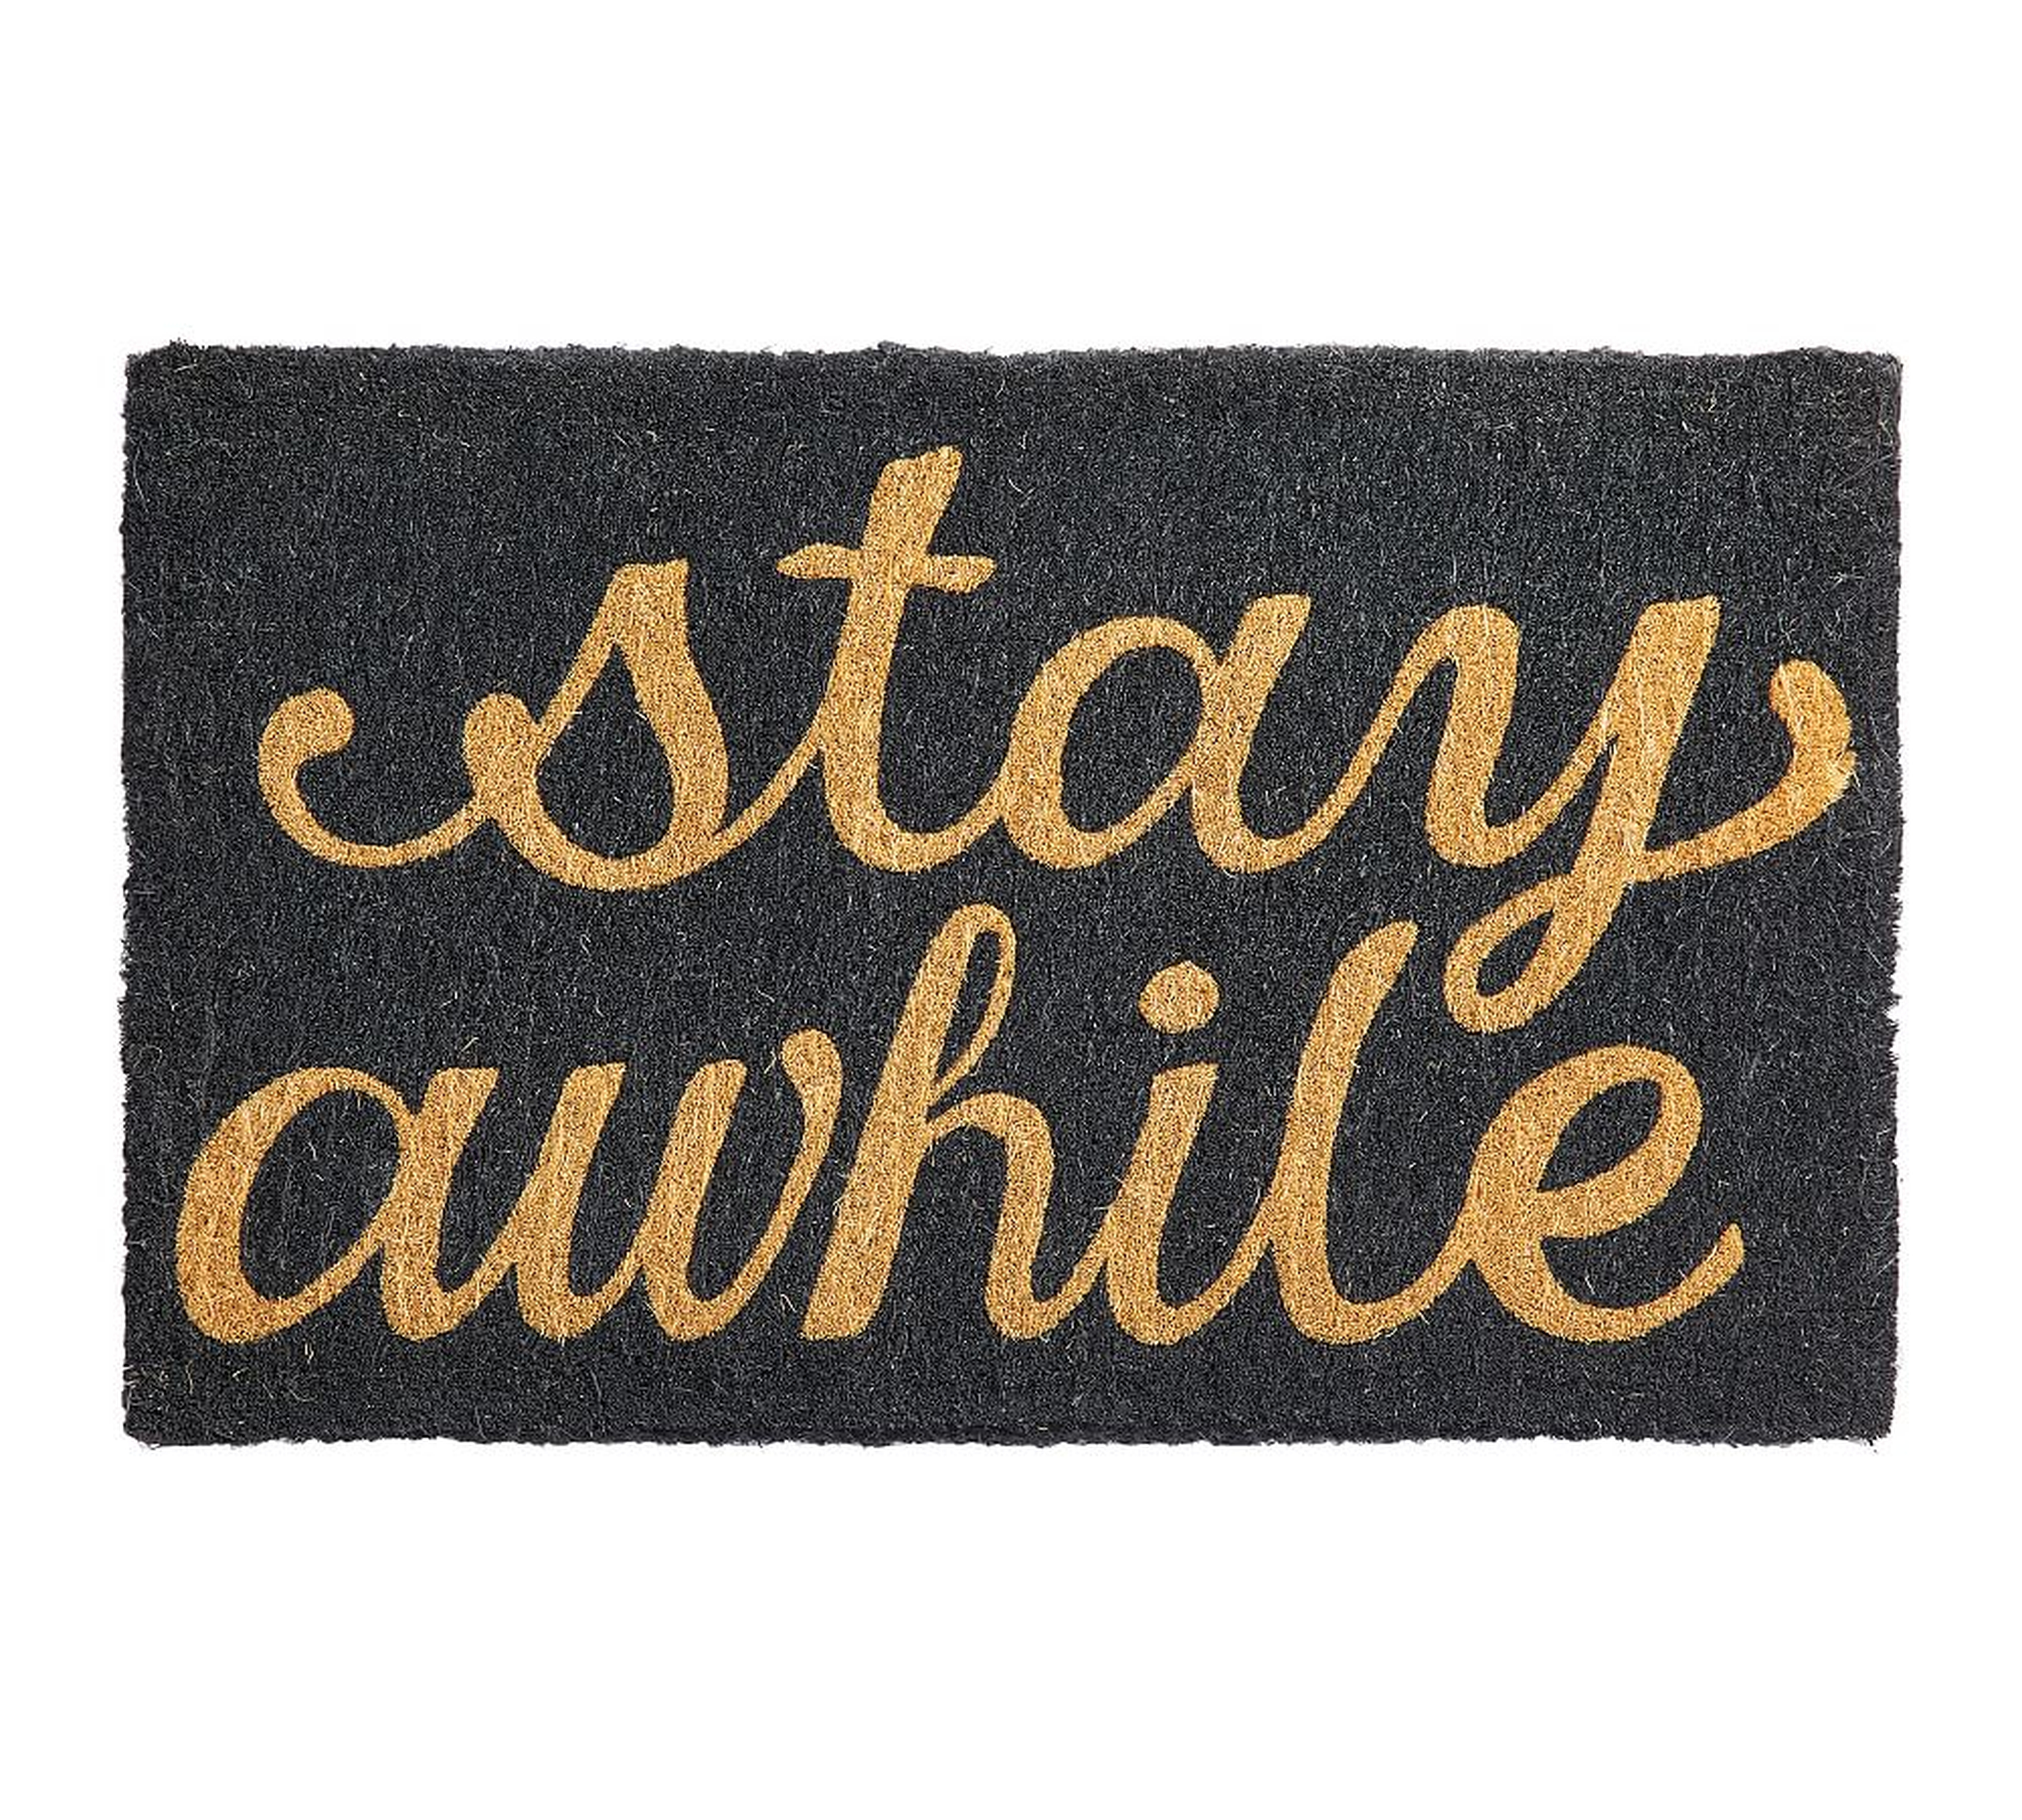 Stay Awhile Doormat, 22 x 36", Black - Pottery Barn